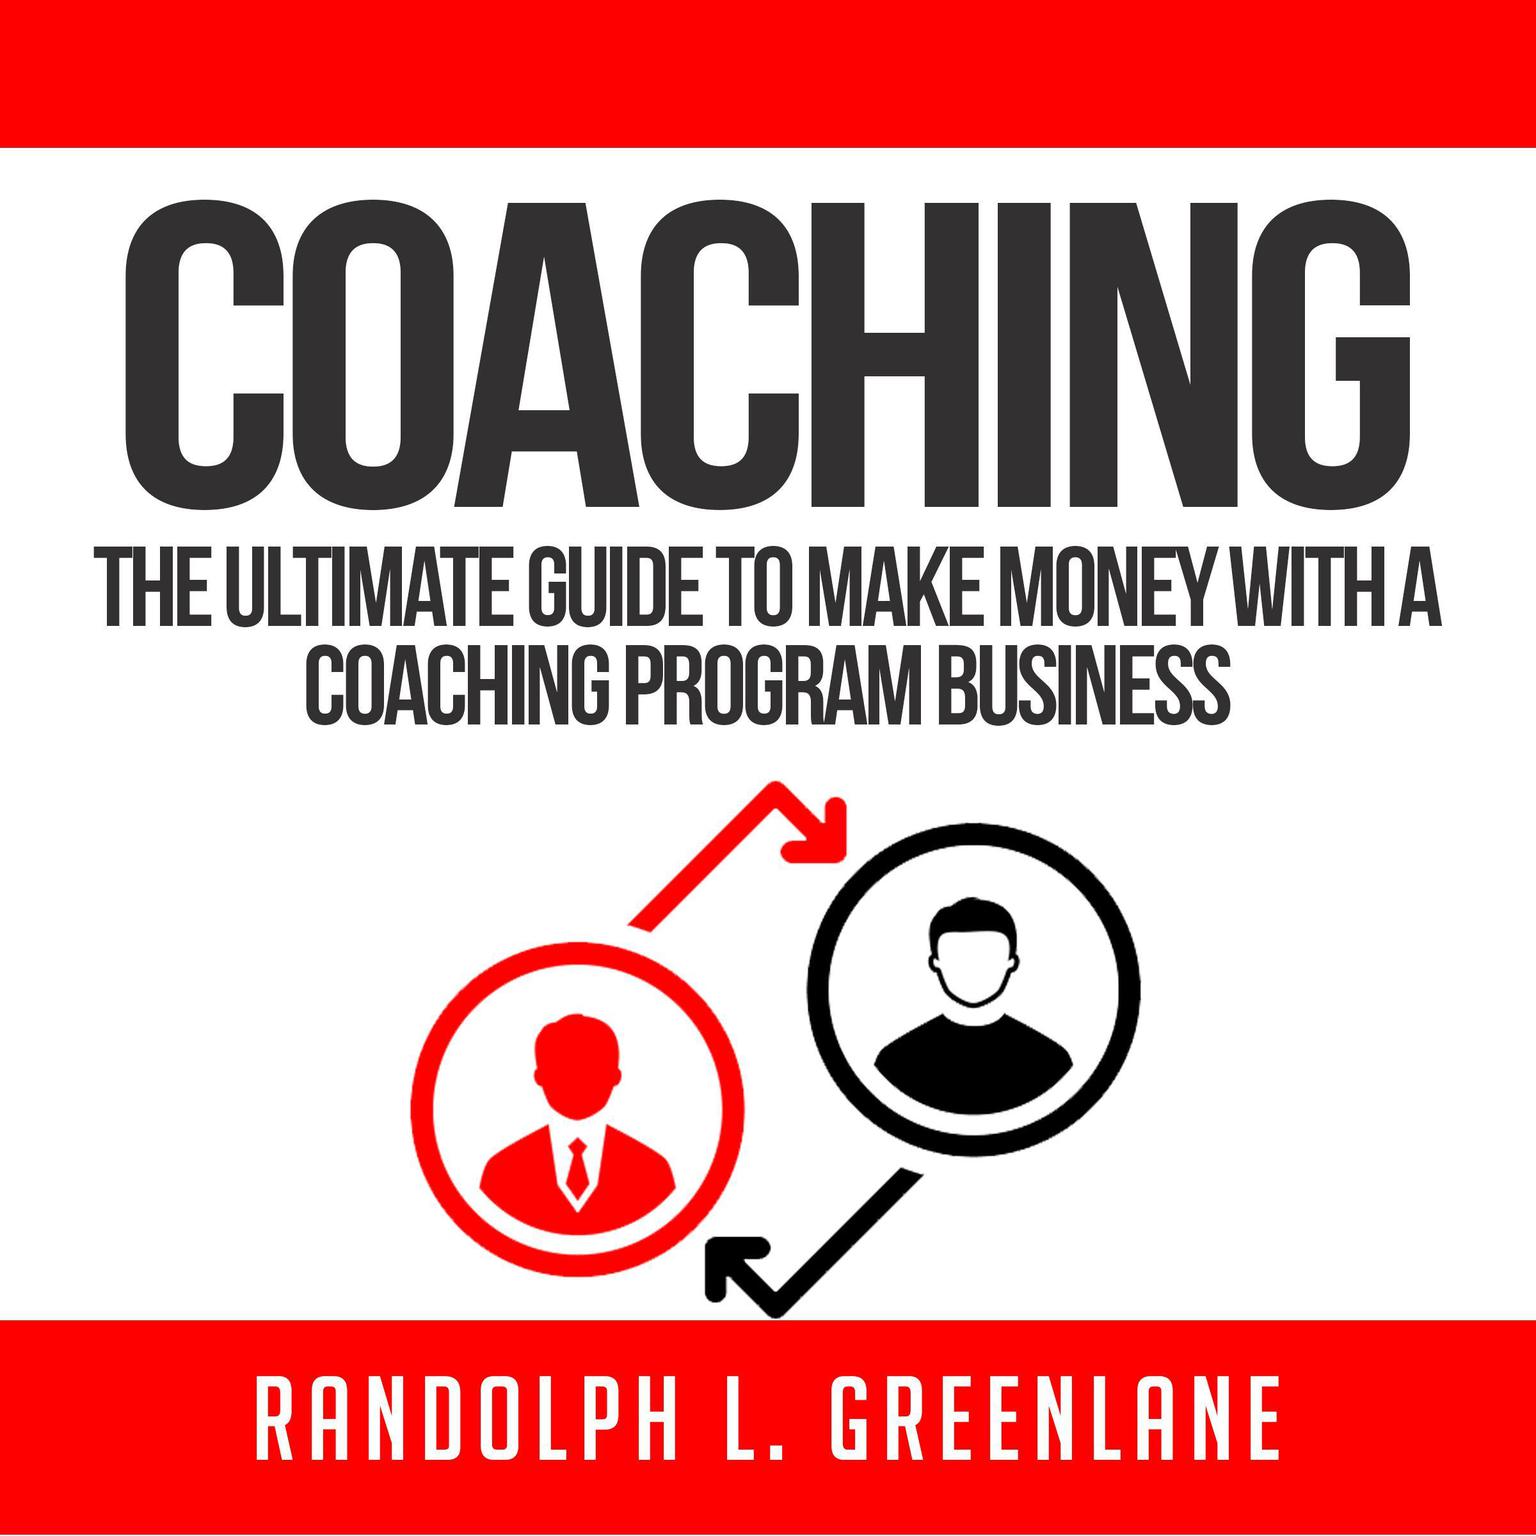 Coaching: The Ultimate Guide to Make Money With a Coaching Program Business Audiobook, by Randolph L. Greenlane